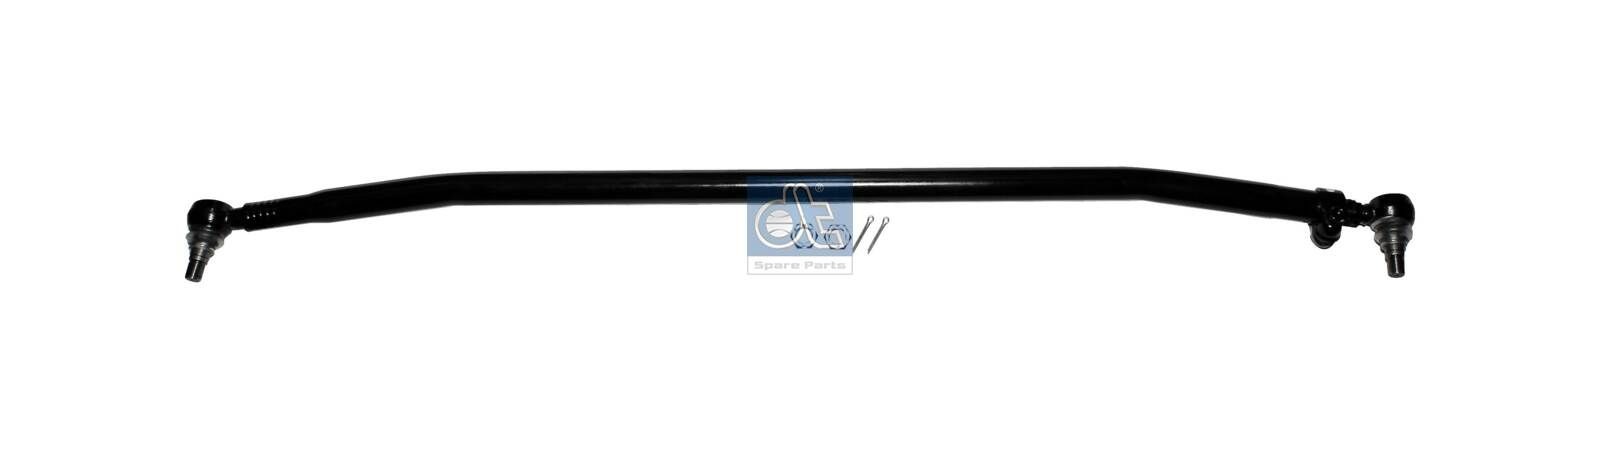 DT Spare Parts 3.63011 Rod Assembly 81 46711 6715